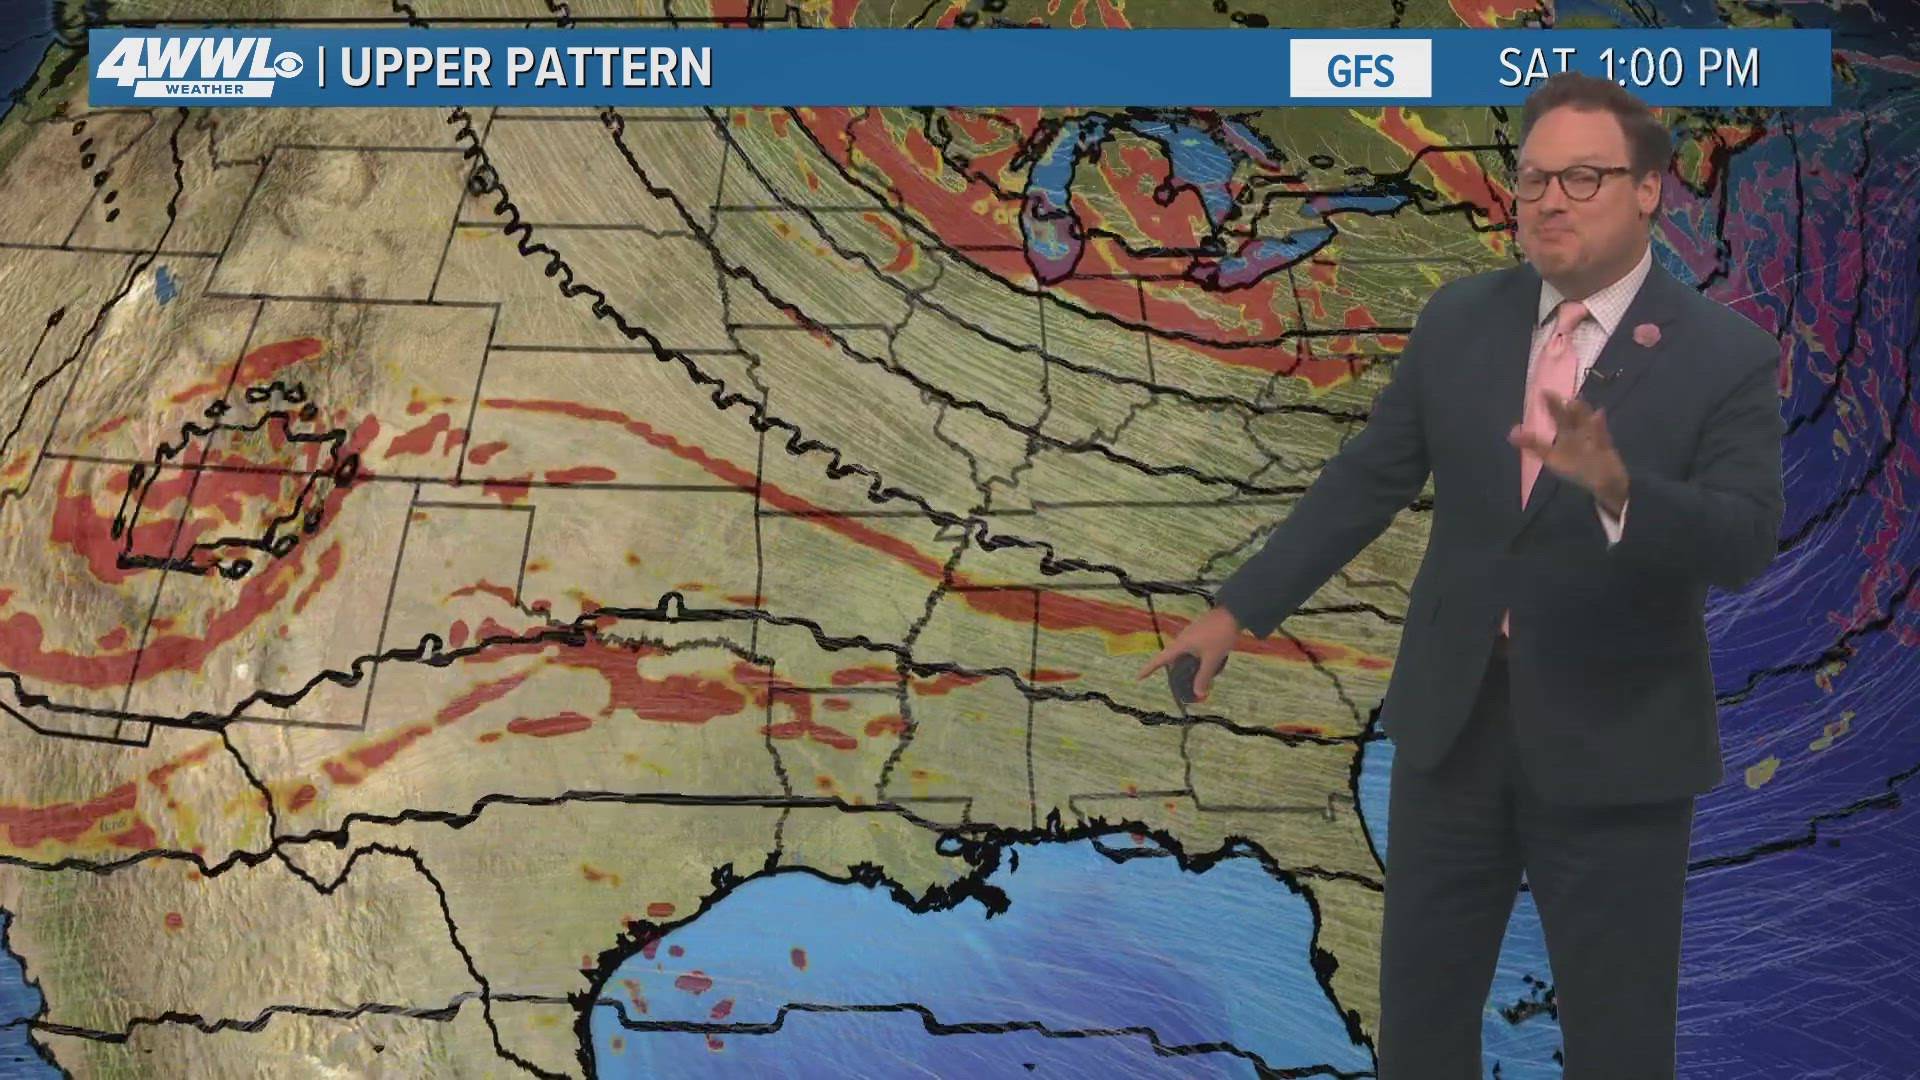 Chief Meteorologist Chris Franklin has a look at the heat for the next few days and rain chances with a cold front.